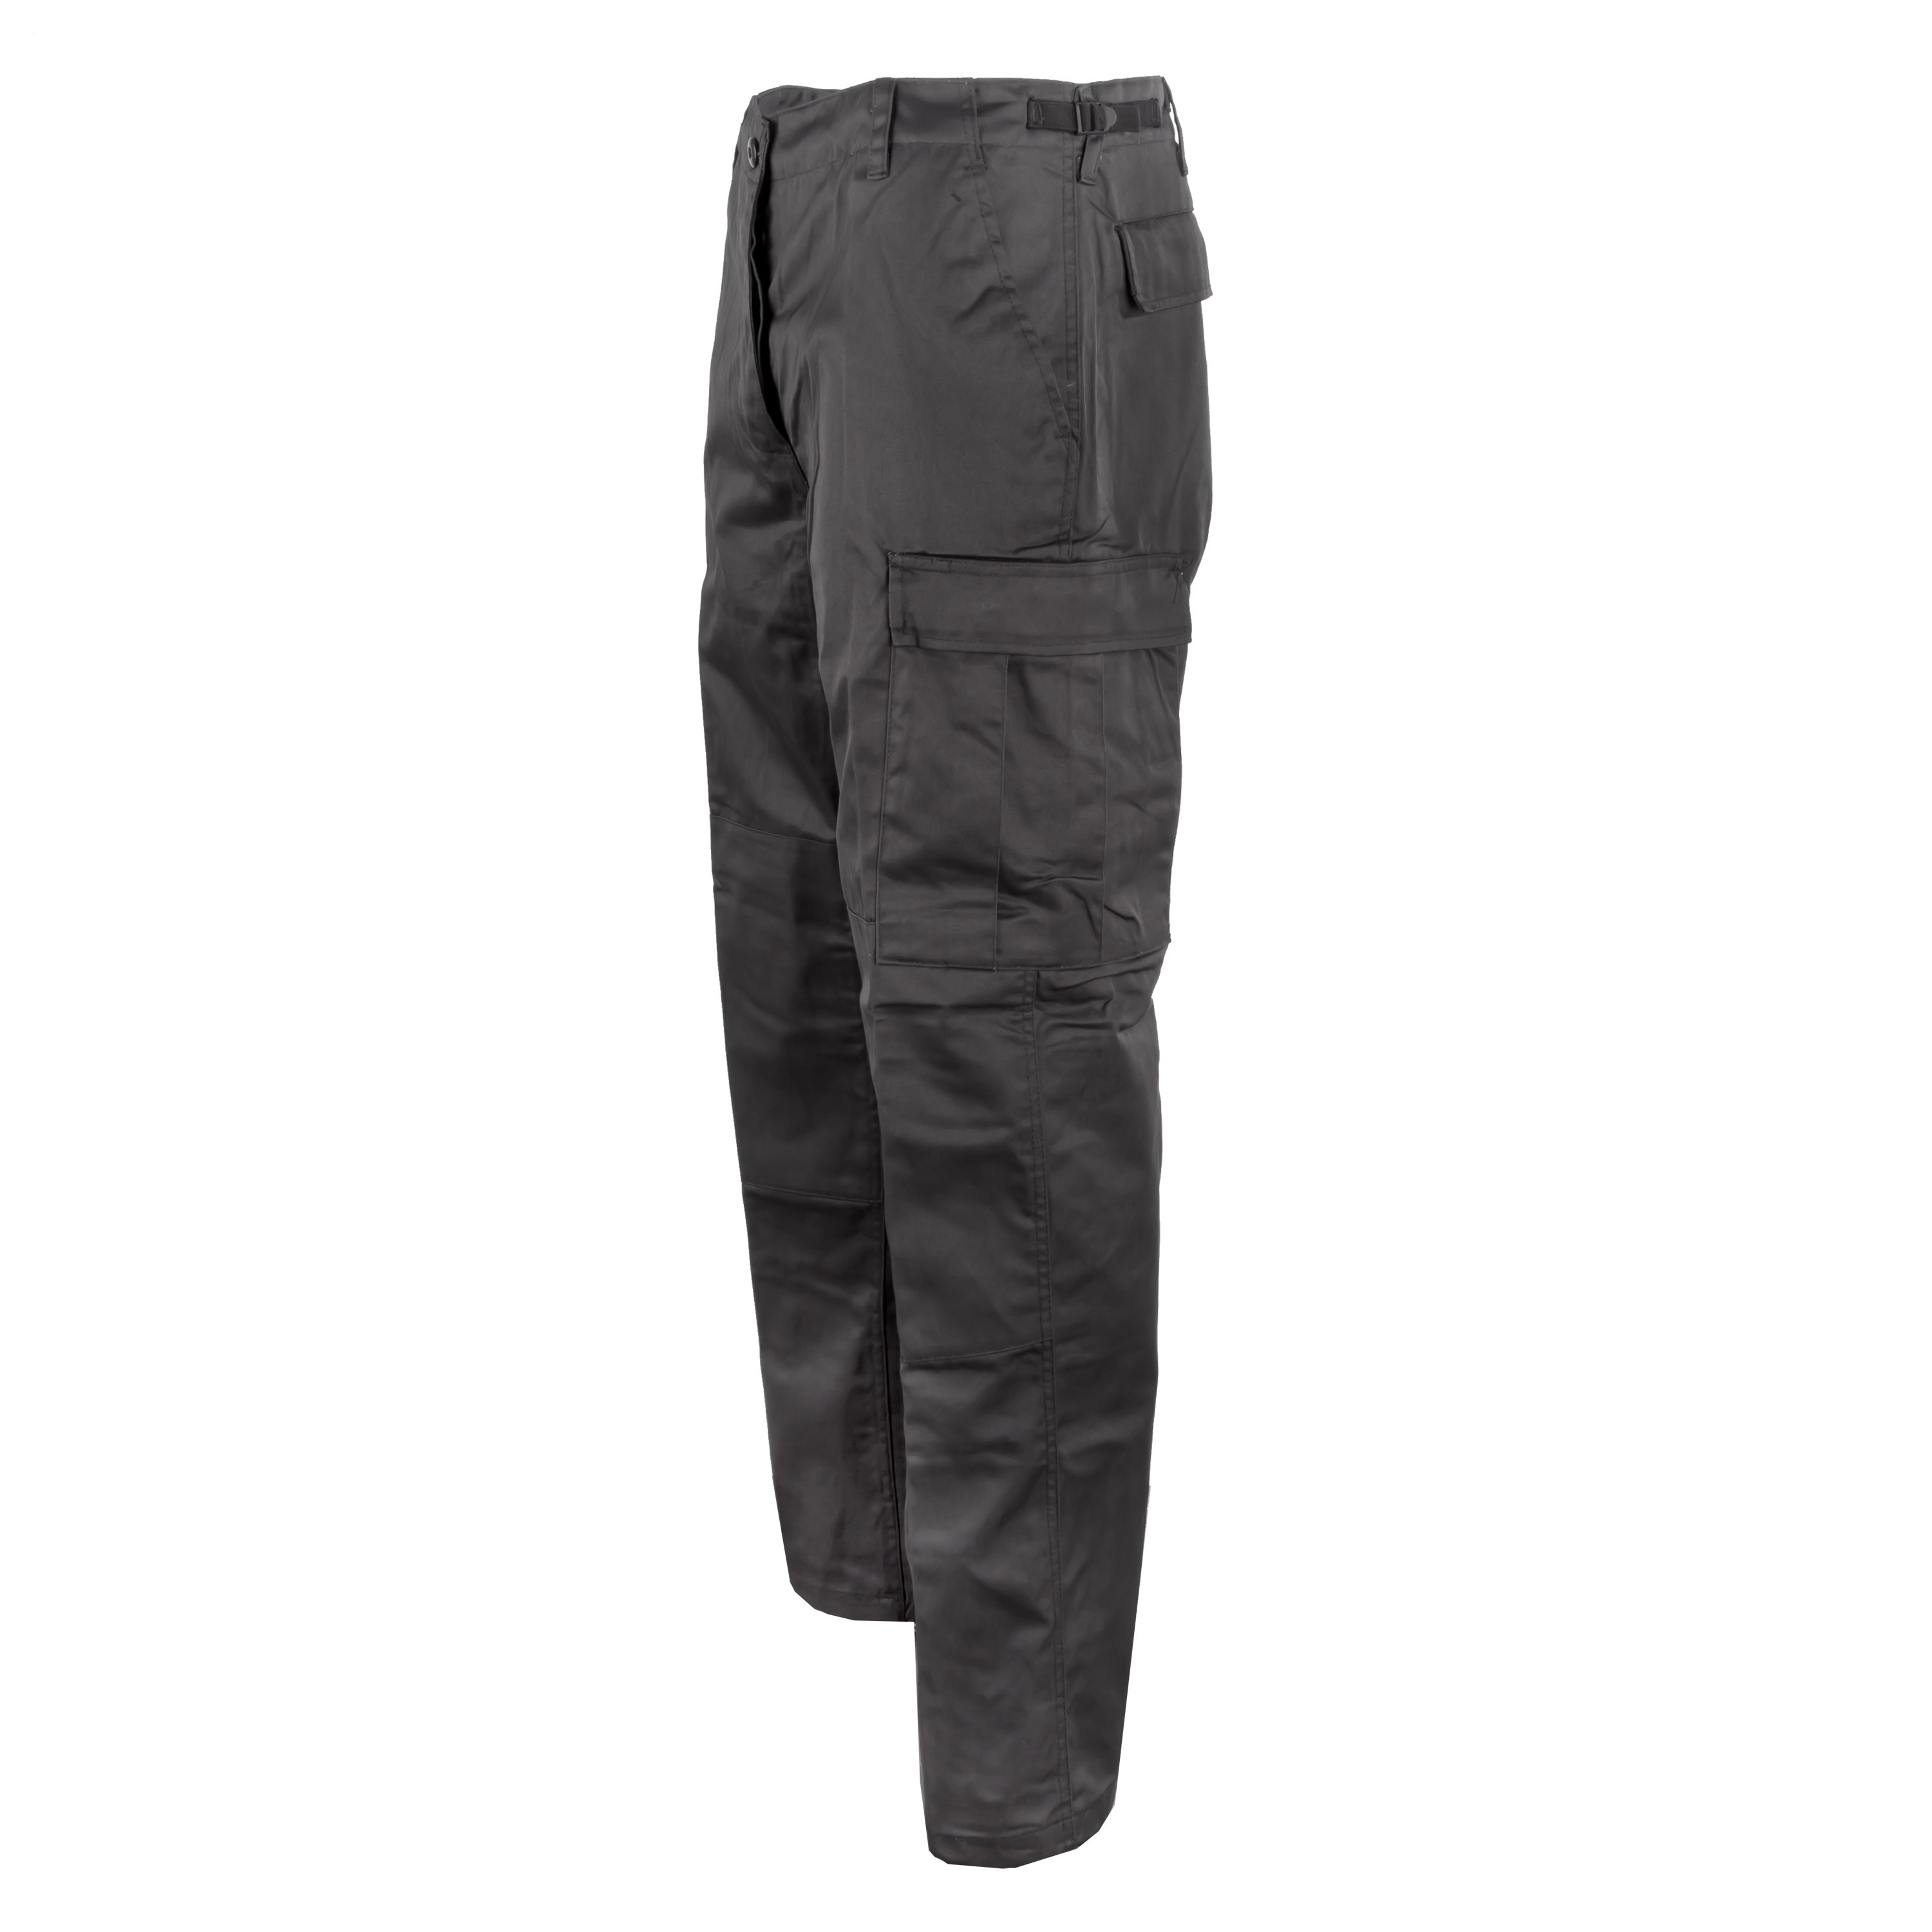 Purchase the BDU Style Pants black by ASMC